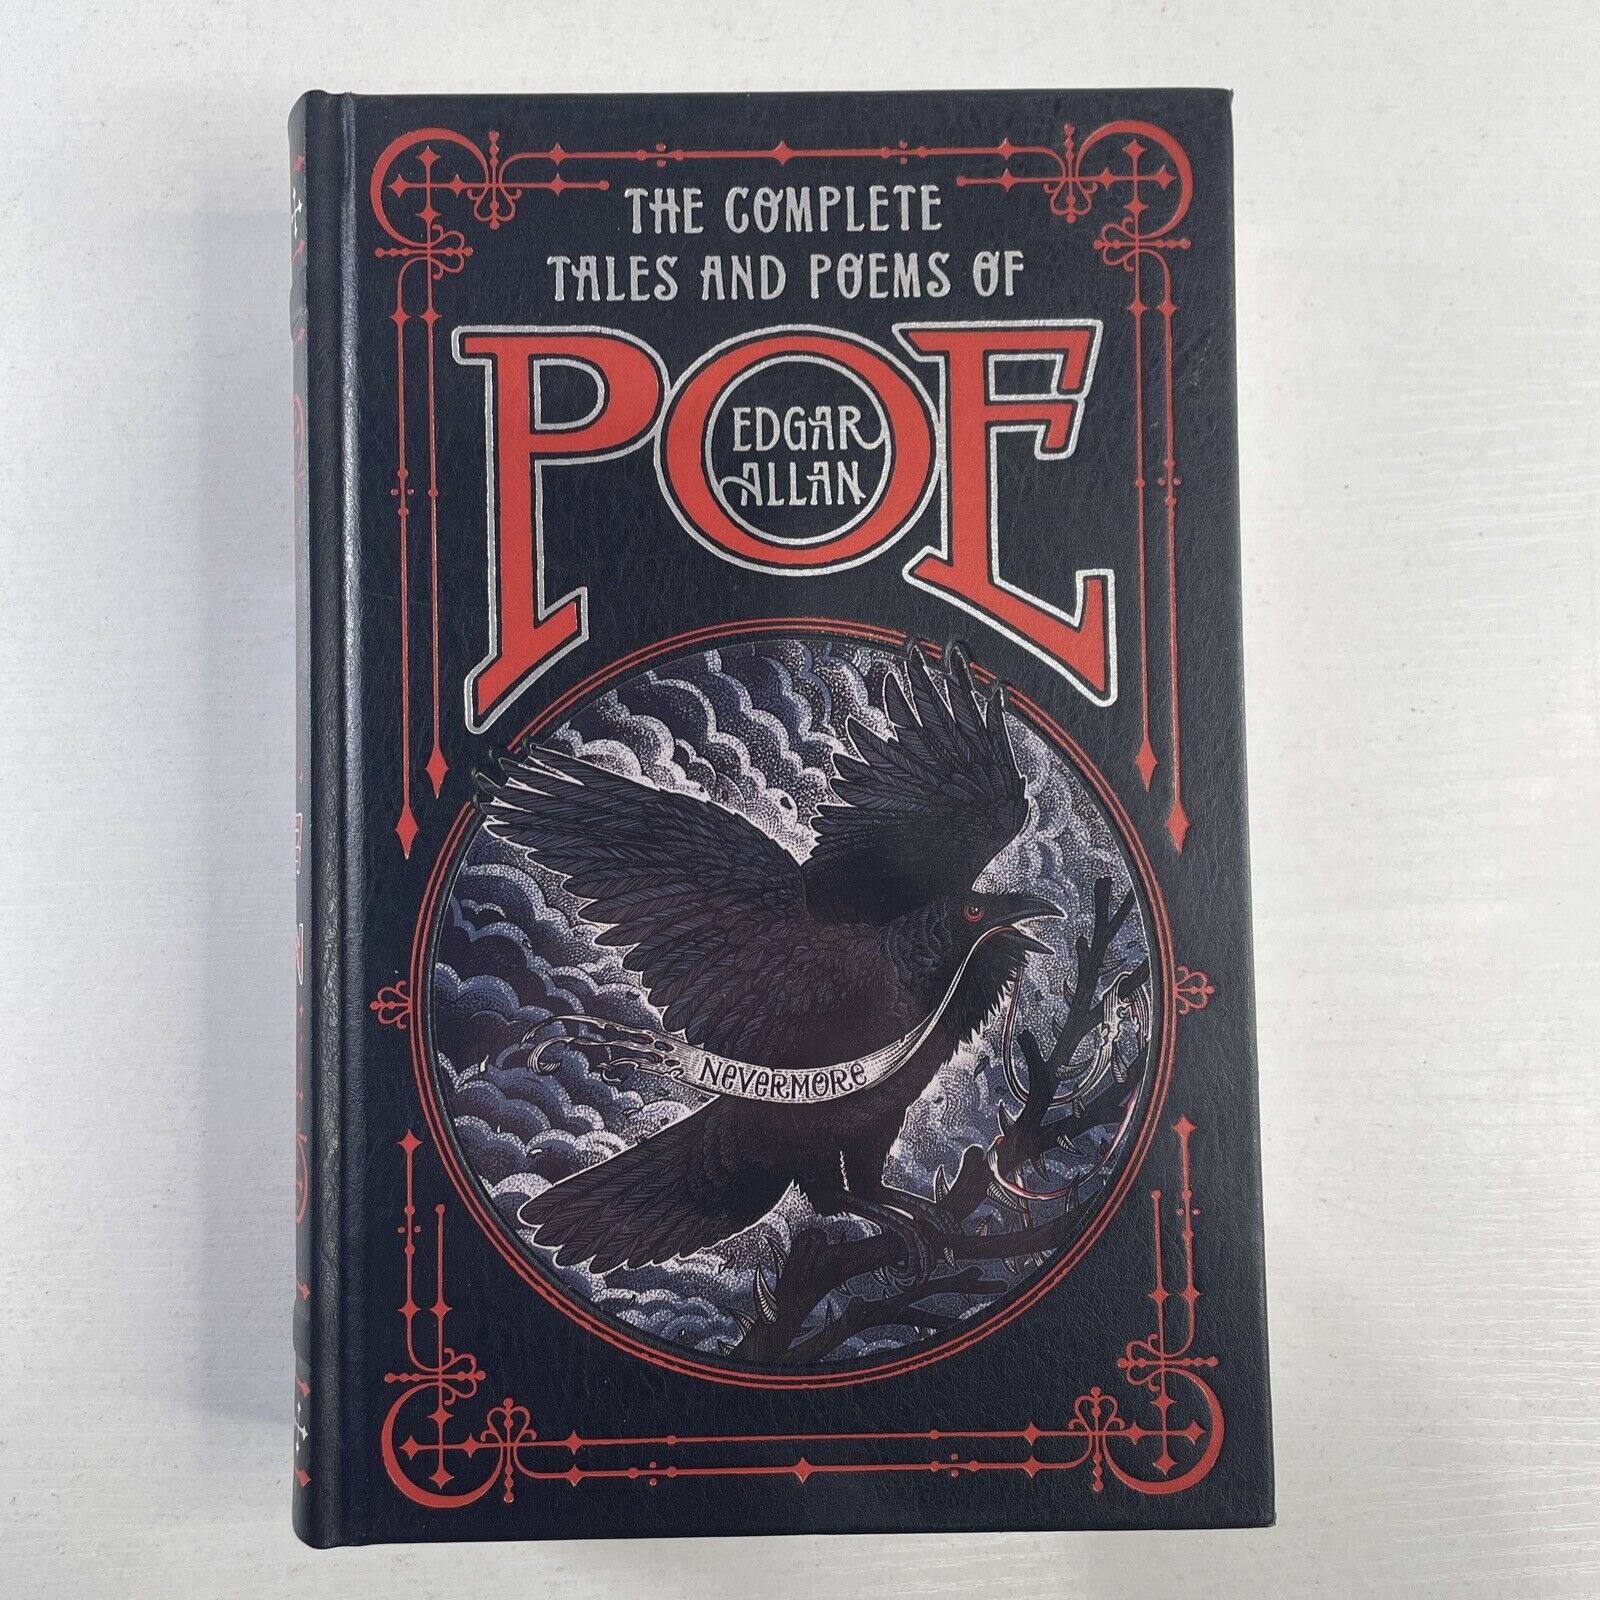 The Complete Tales and Poems of Edgar Allan Poe (Barnes & Noble Leather)